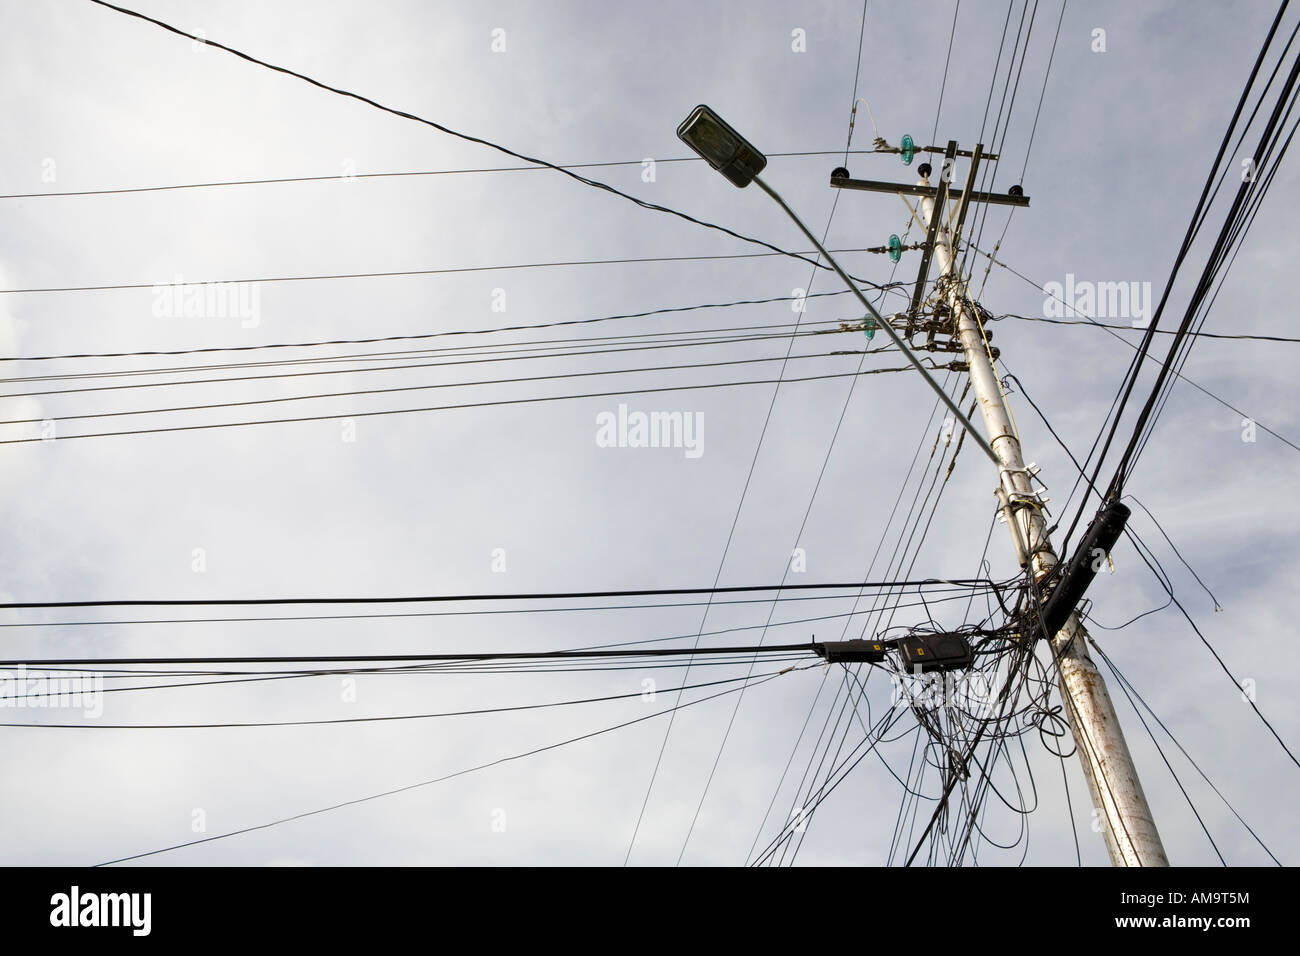 Overcrowded power lines against grey cloudy skies, Tobago Island Caribbean. Stock Photo